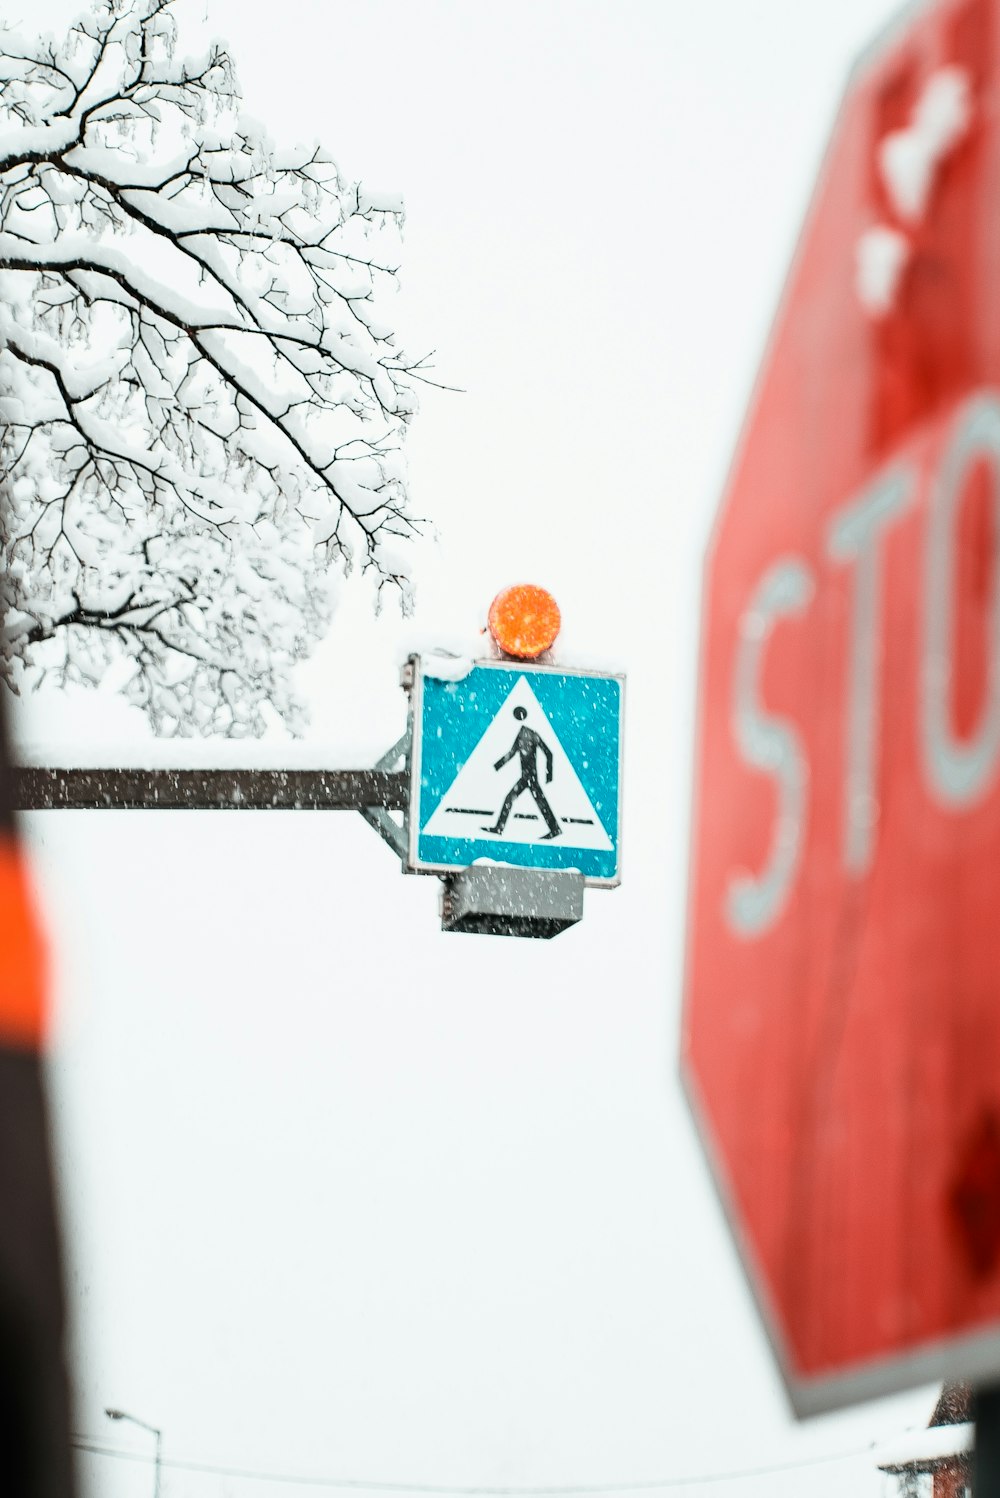 selective focus photography of red traffic sign